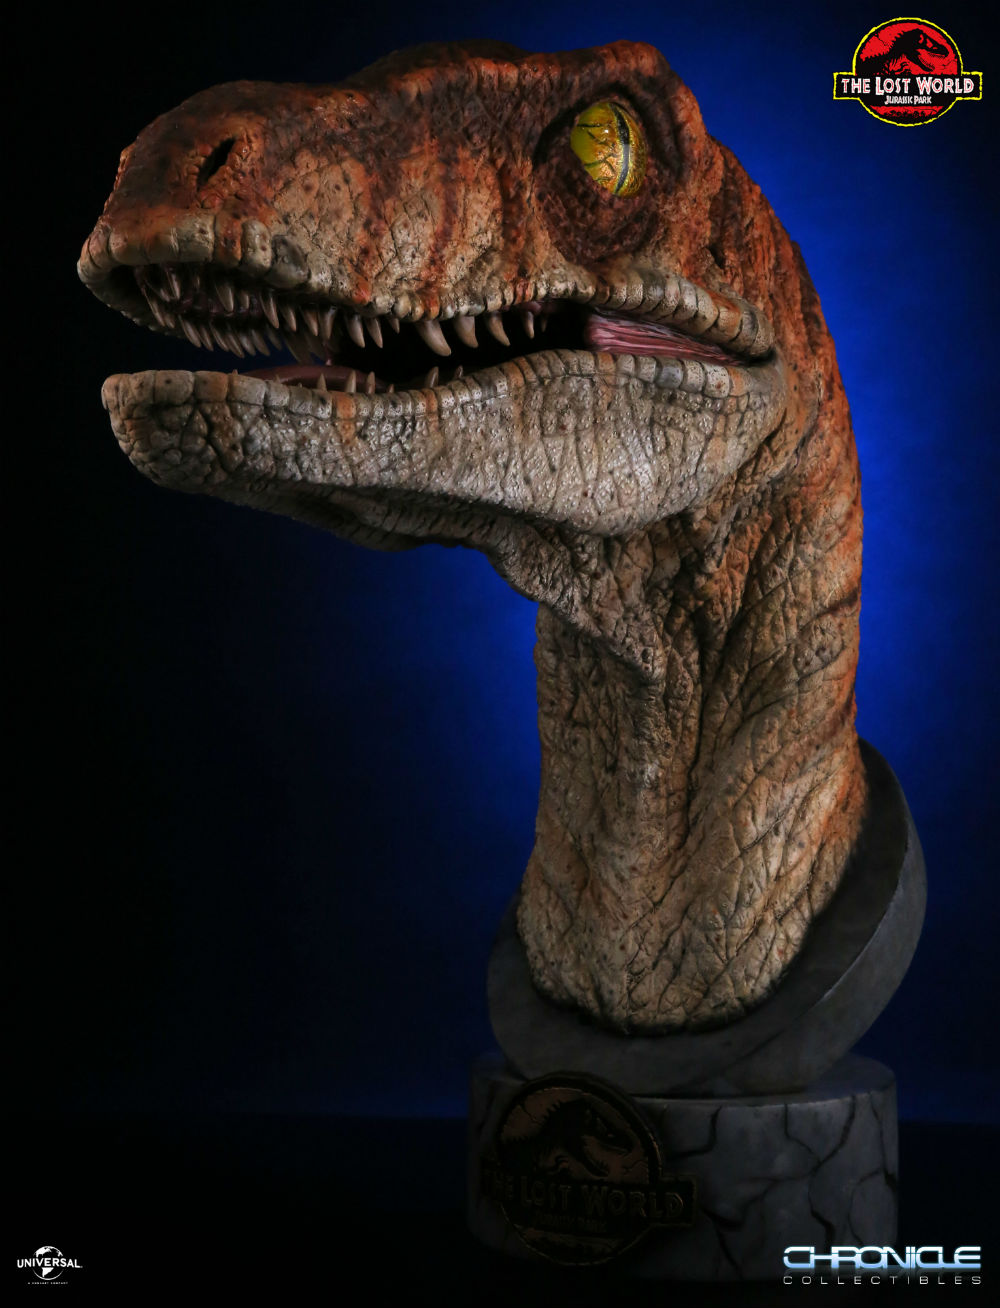 This Is The Sickest Dinosaur Collectible Ever, Literally